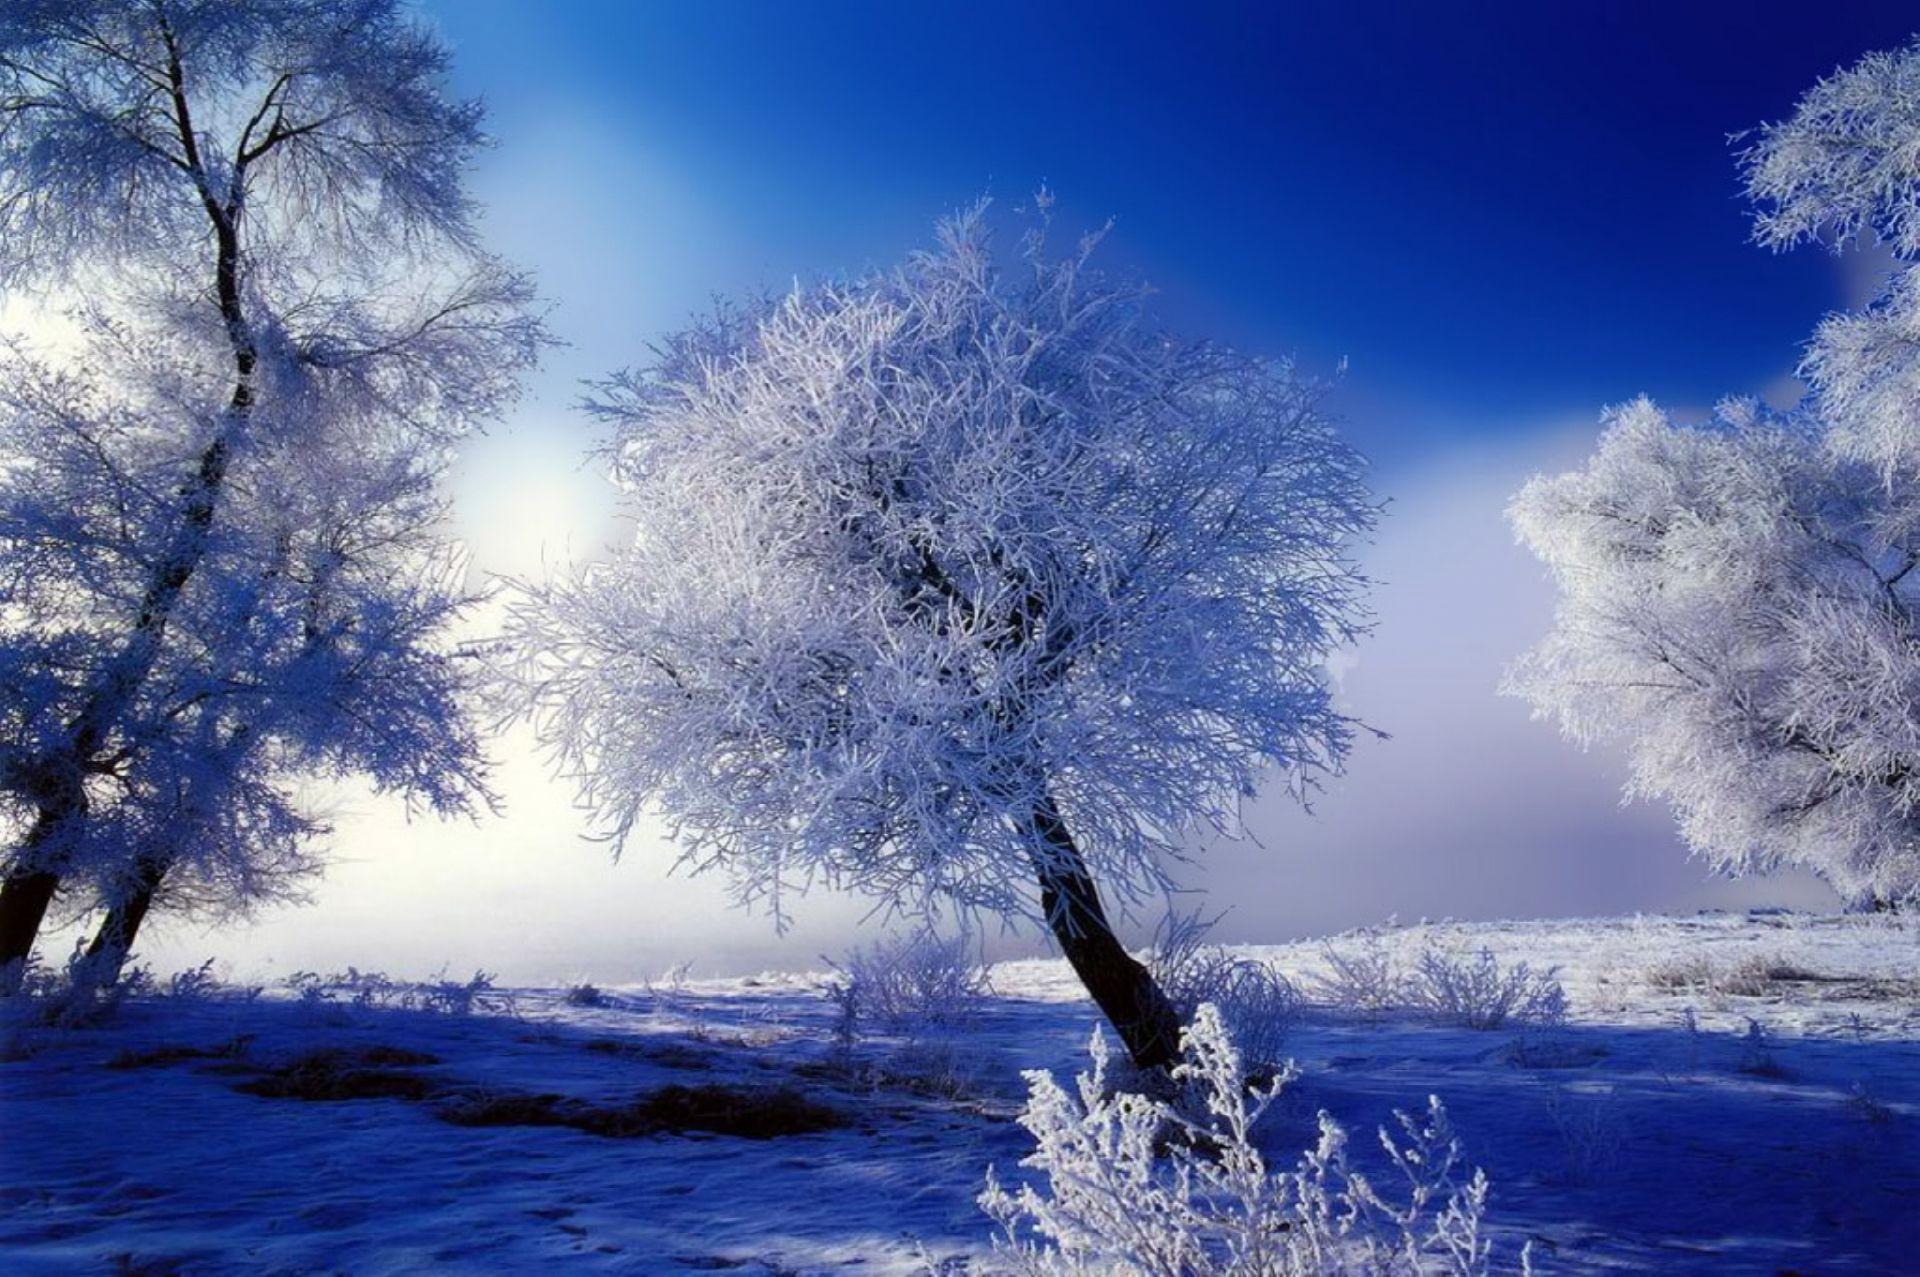 winter snow frost cold weather tree landscape nature ice frozen fair weather sky season dawn frosty scenic wood outdoors fog